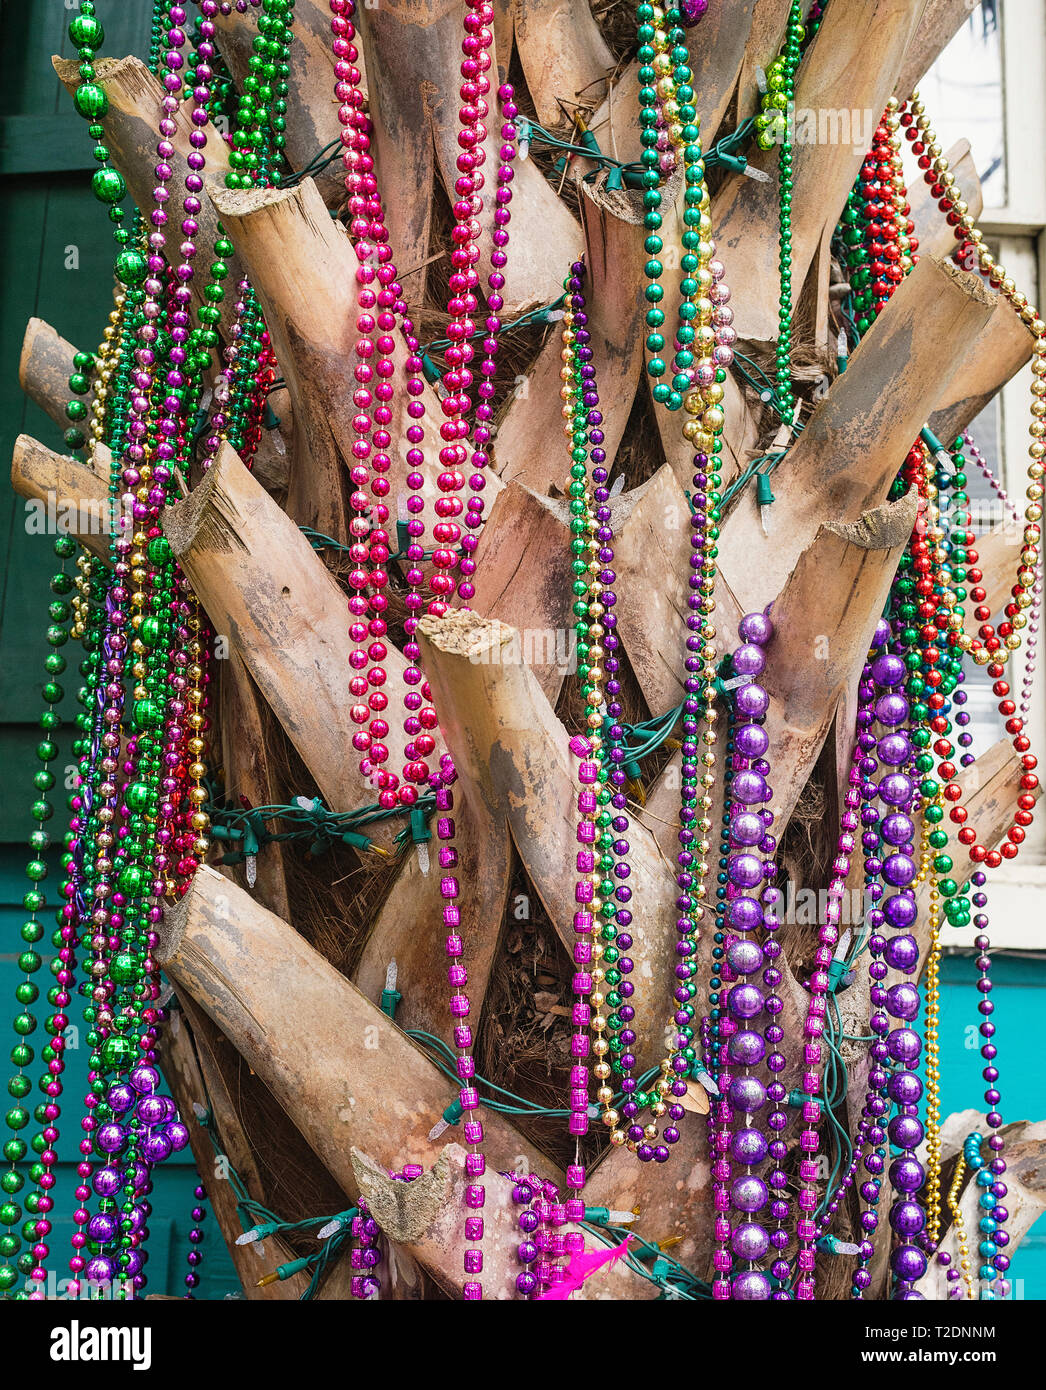 New Orleans Santa with Mardi Gras Beads - NEW!